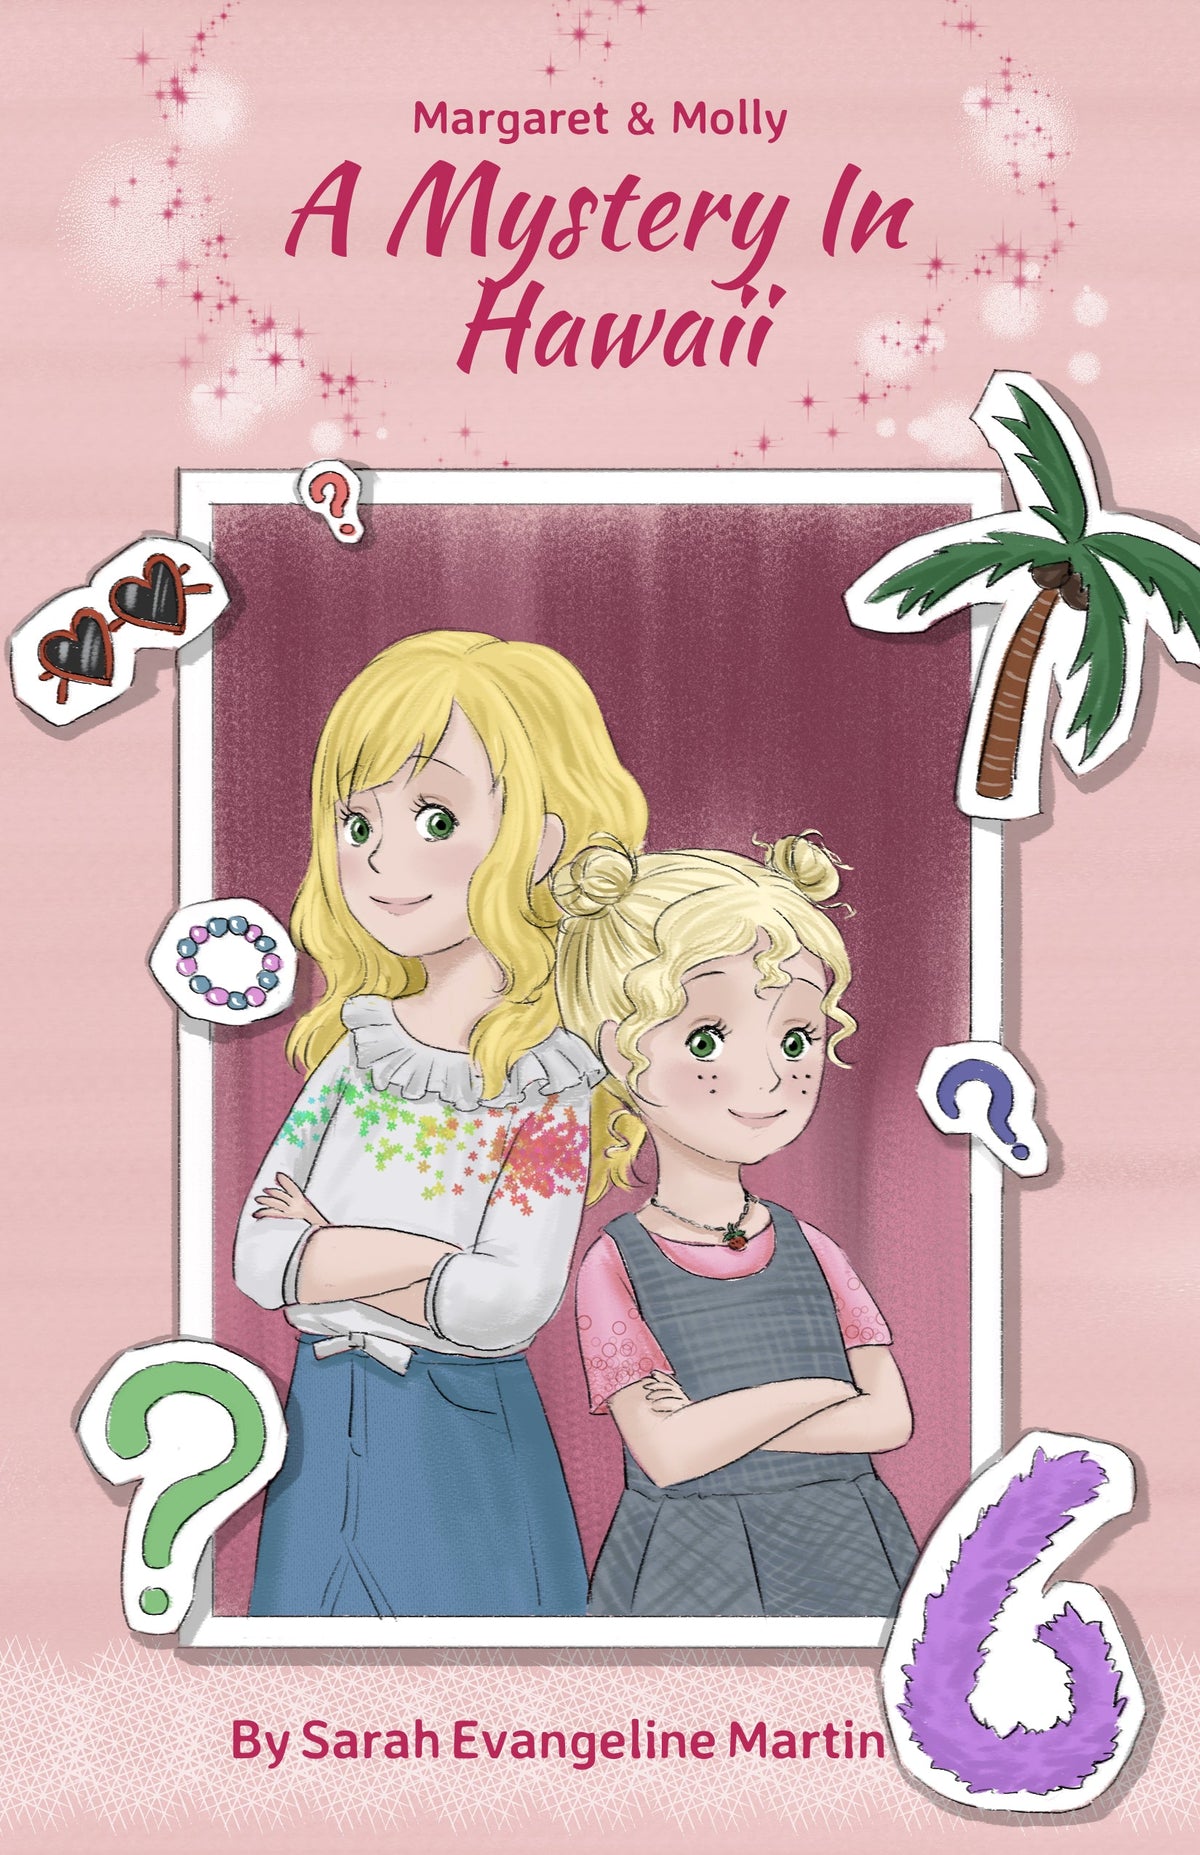 Margaret & Molly - A Mystery In Hawaii - Book 1